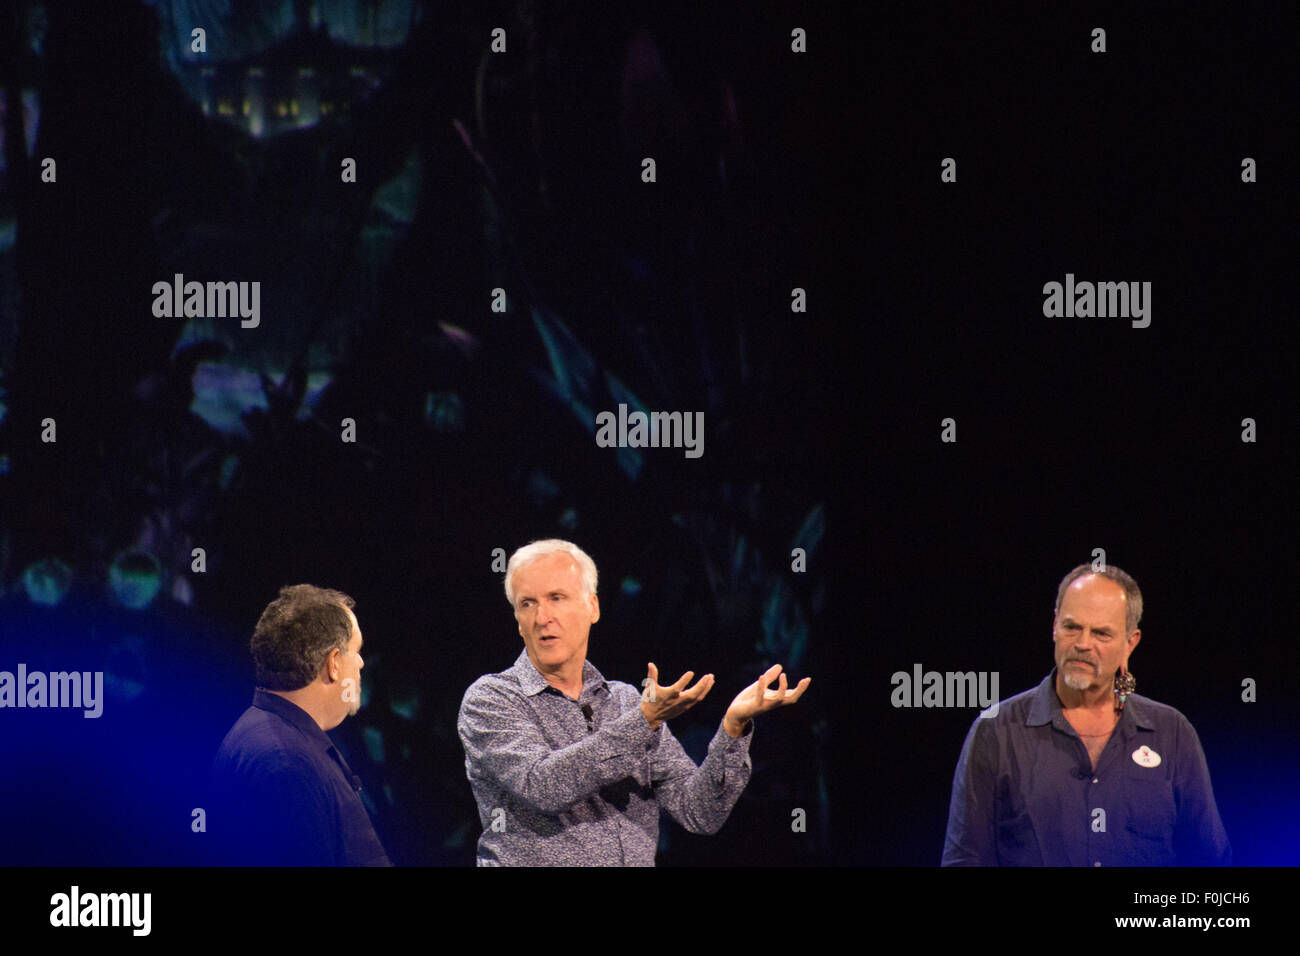 Anaheim, California, USA. 15th Aug, 2015. Producer Jon Landau and director James Cameron join Imagineer Joe Rohde to talk about the new “Avatar” themed land called Pandora being constructed at Disney's Animal Kingdom in Florida at the Disney D23 Expo in Anaheim, CA, USA, August 15, 2015. Credit:  Kayte Deioma/Alamy Live News Stock Photo